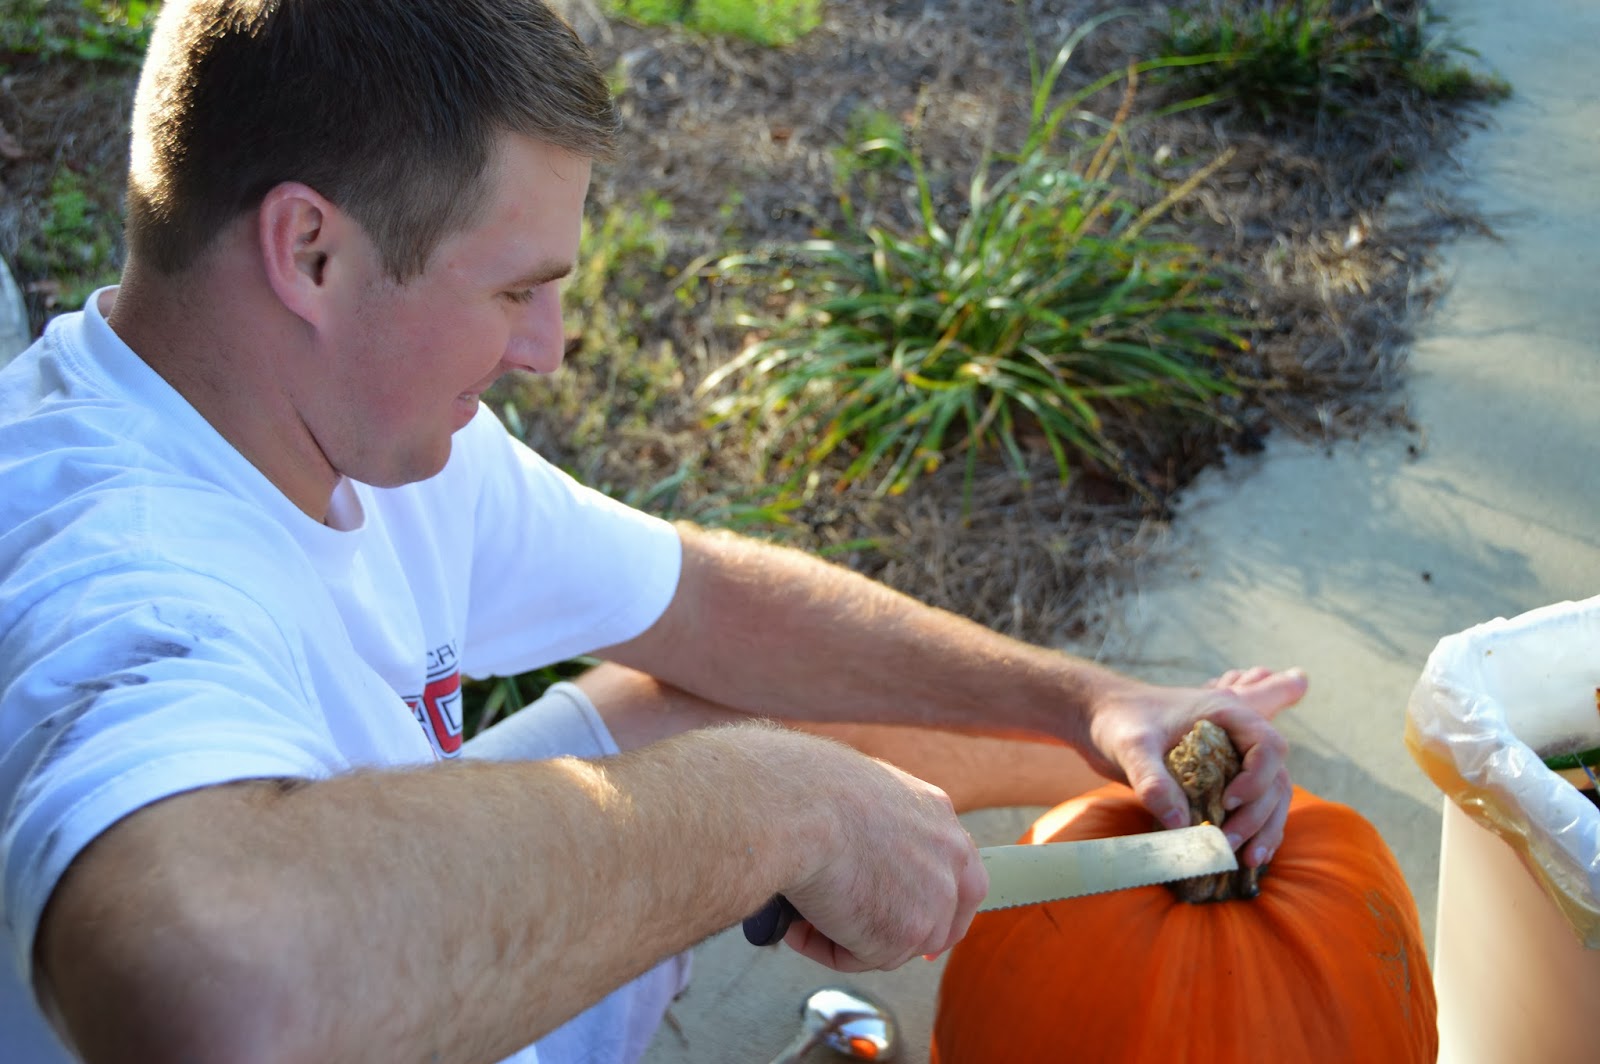 Carving our Pumpkin